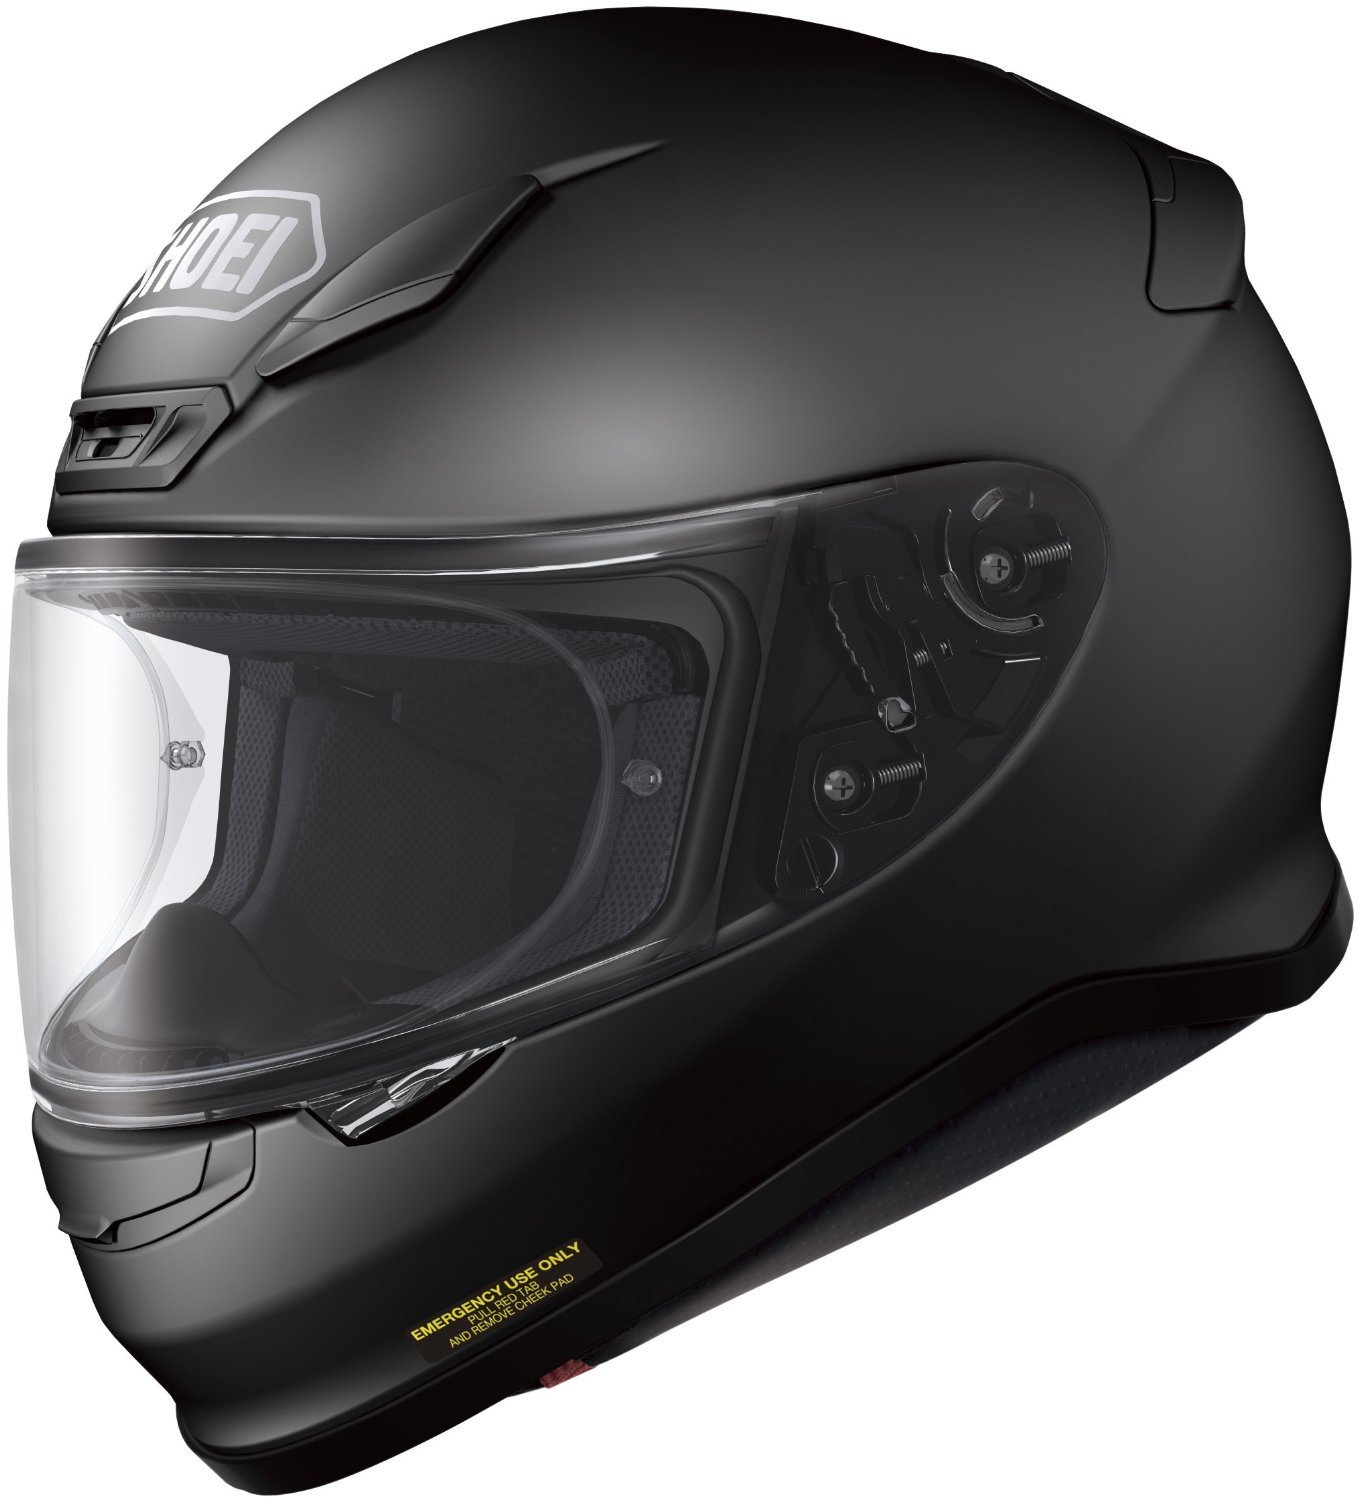 Best Motorcycle Helmets and Brands [Ultimate Buyer's Guide] | The Moto Expert